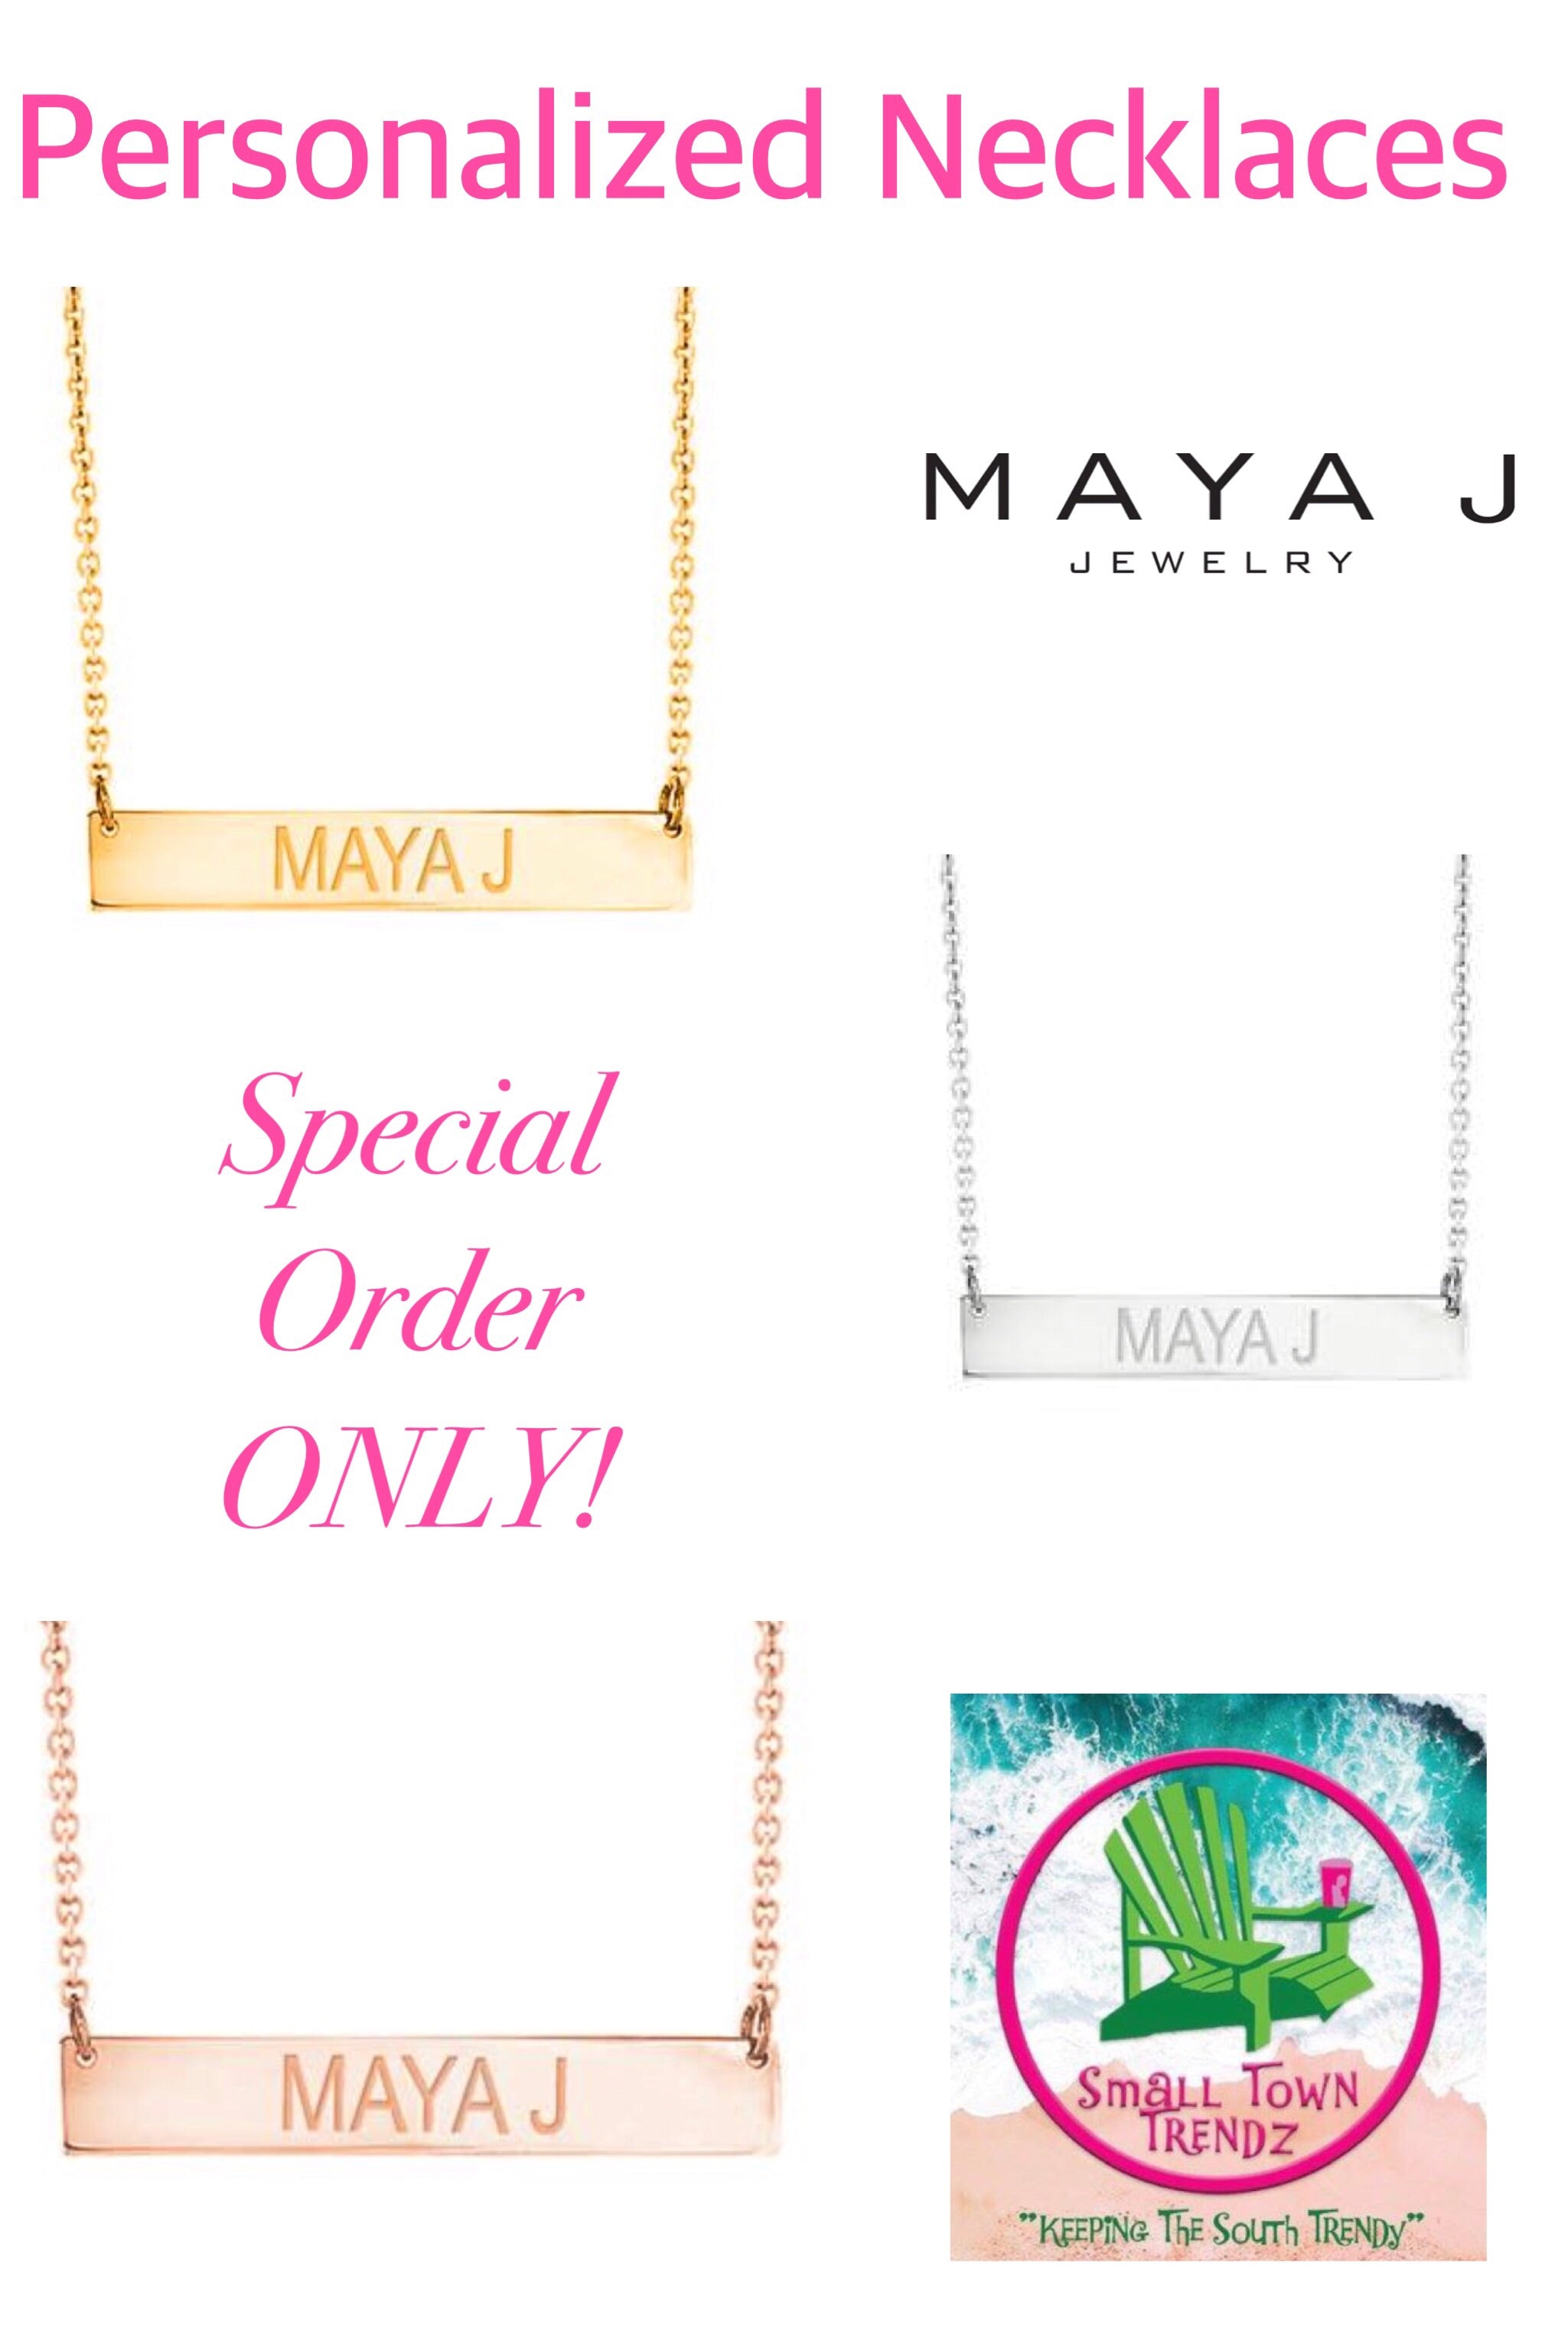 Personalized Bar Necklace by Maya J (Special Order Only!)